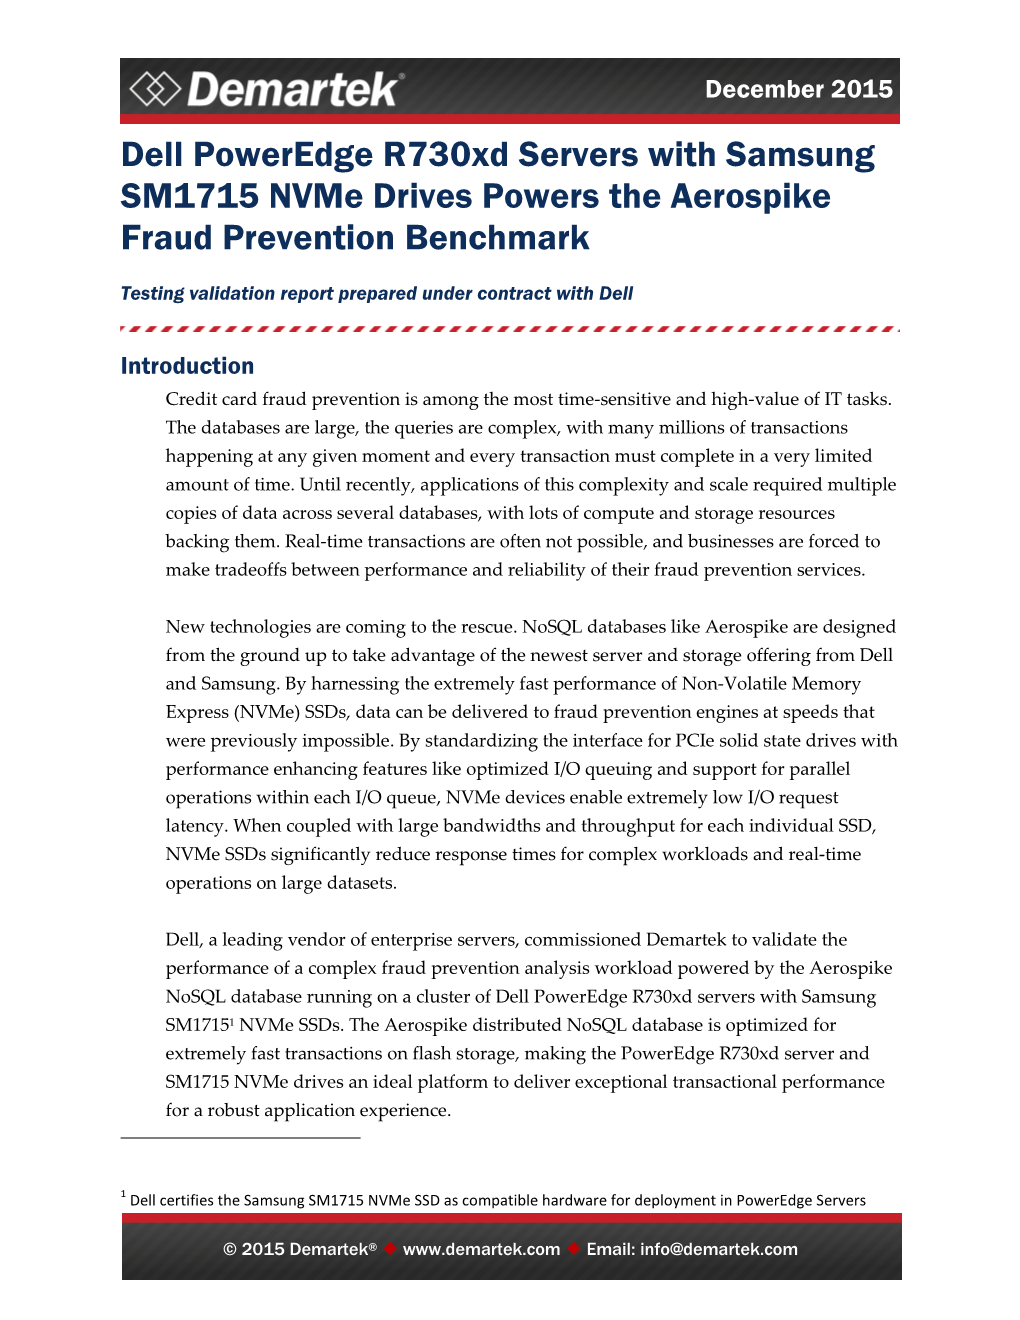 Dell Poweredge R730xd Servers with Samsung SM1715 Nvme Drives Powers the Aerospike Fraud Prevention Benchmark